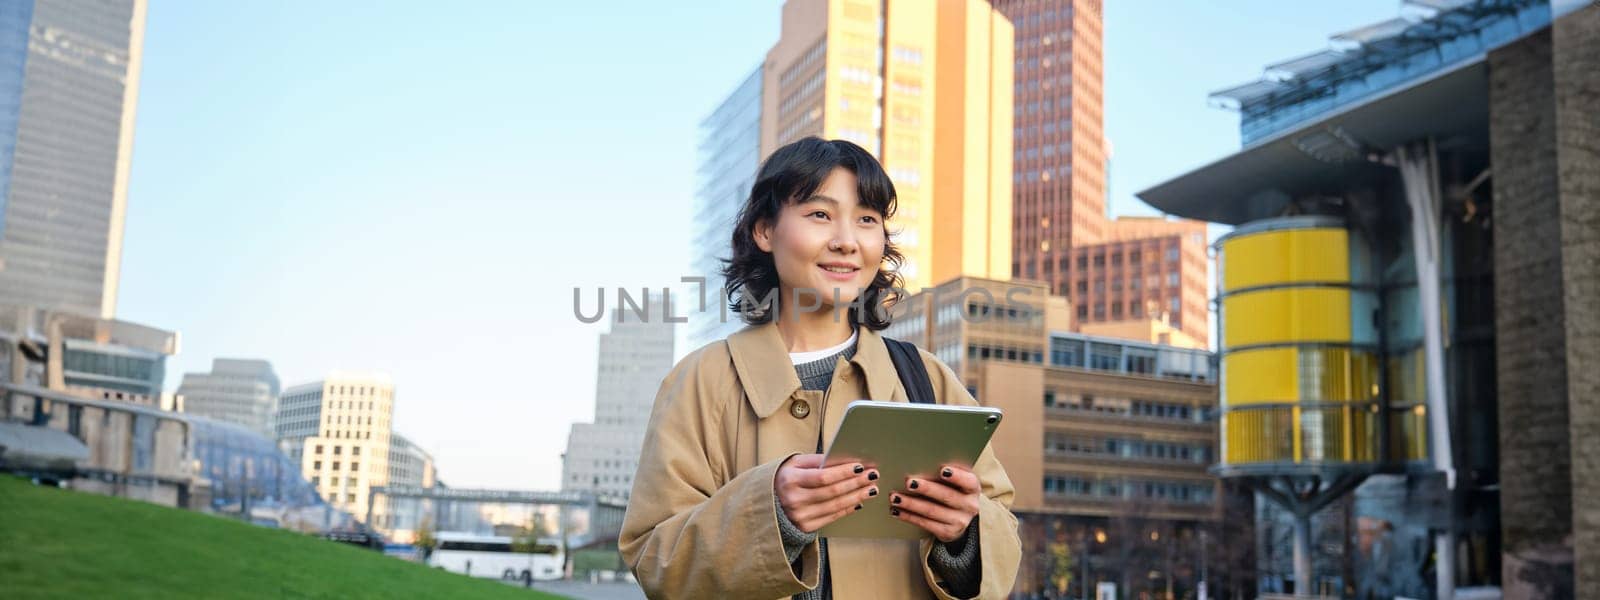 Happy young brunette girl, asian woman walks around city with tablet, goes to university with her digital gadget and backpack.